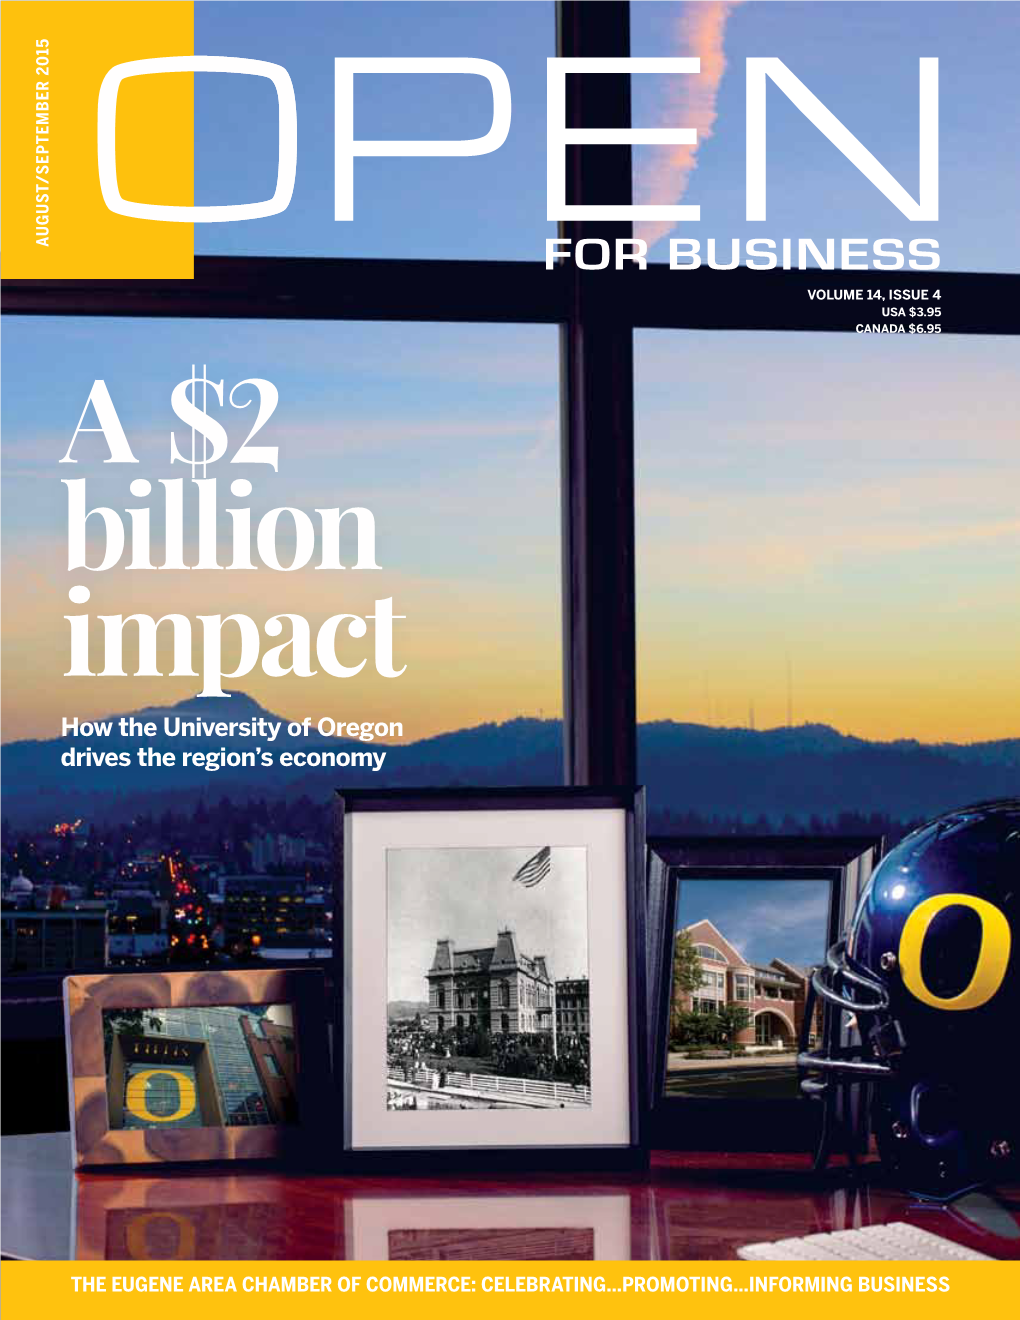 FOR BUSINESS VOLUME 14, ISSUE 4 USA $3.95 CANADA $6.95 a $2 Billion Impact How the University of Oregon Drives the Region’S Economy